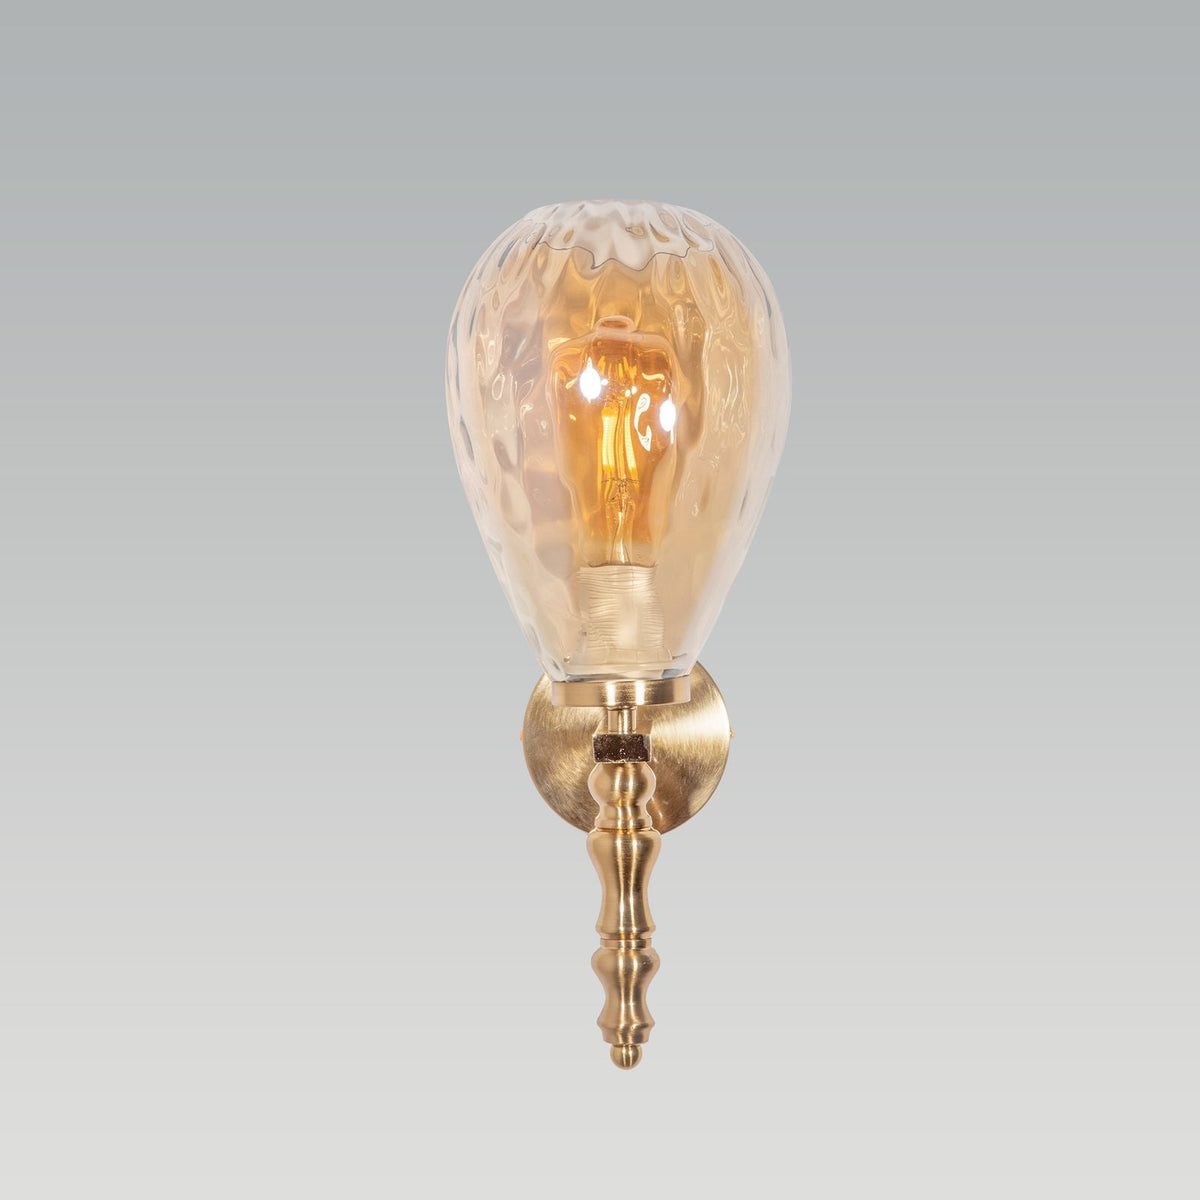 Shop Finding Glory Wall Lamp online